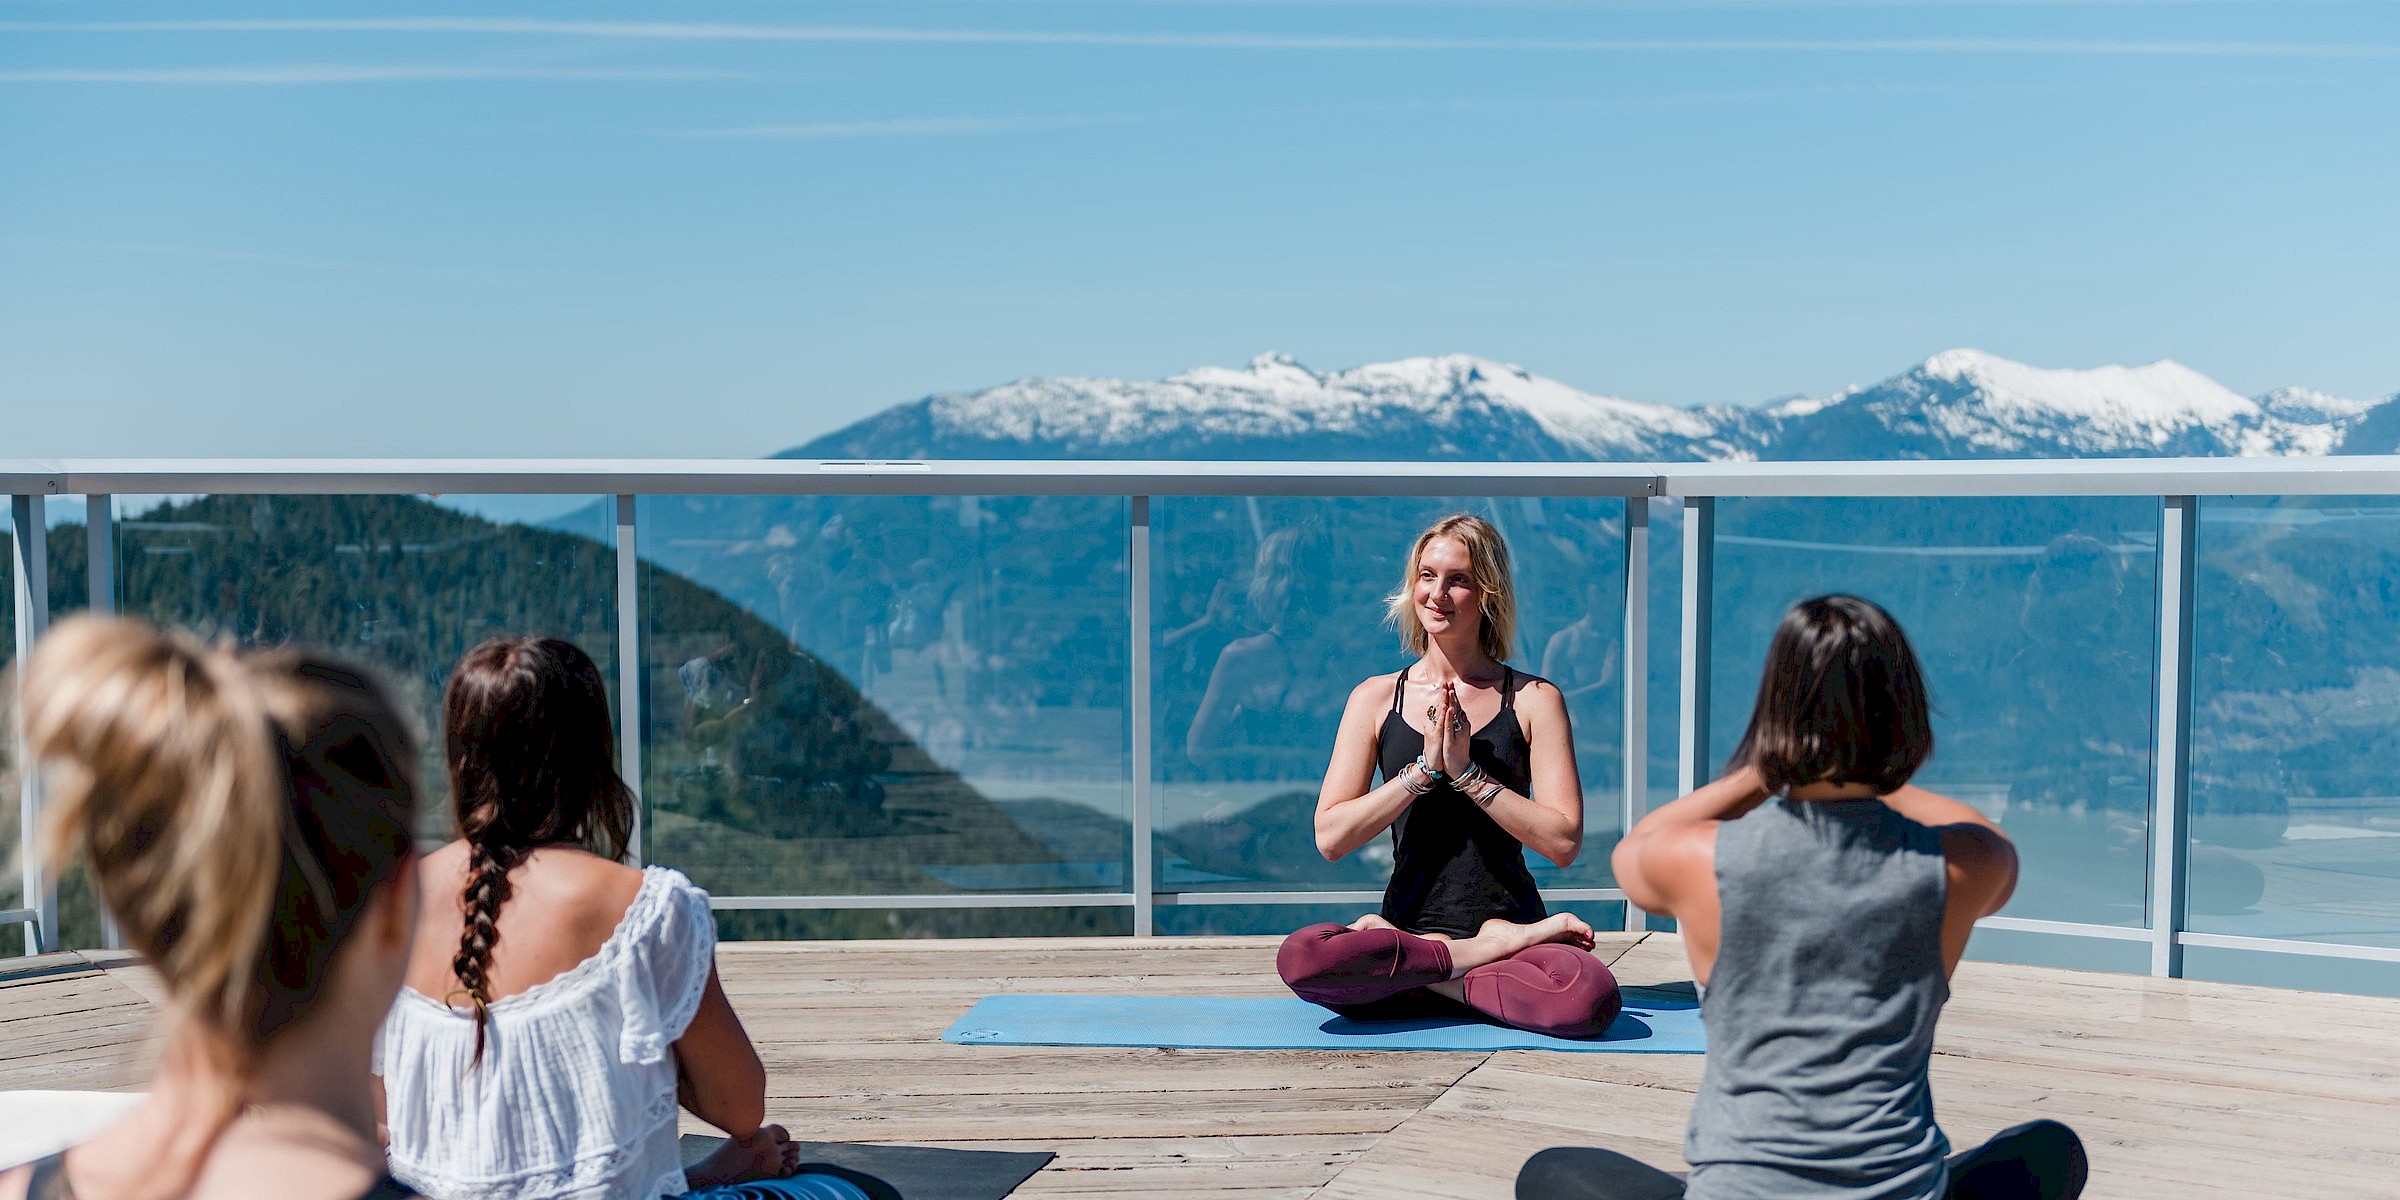 Yoga practice at the summit of the Sea to Sky gondola